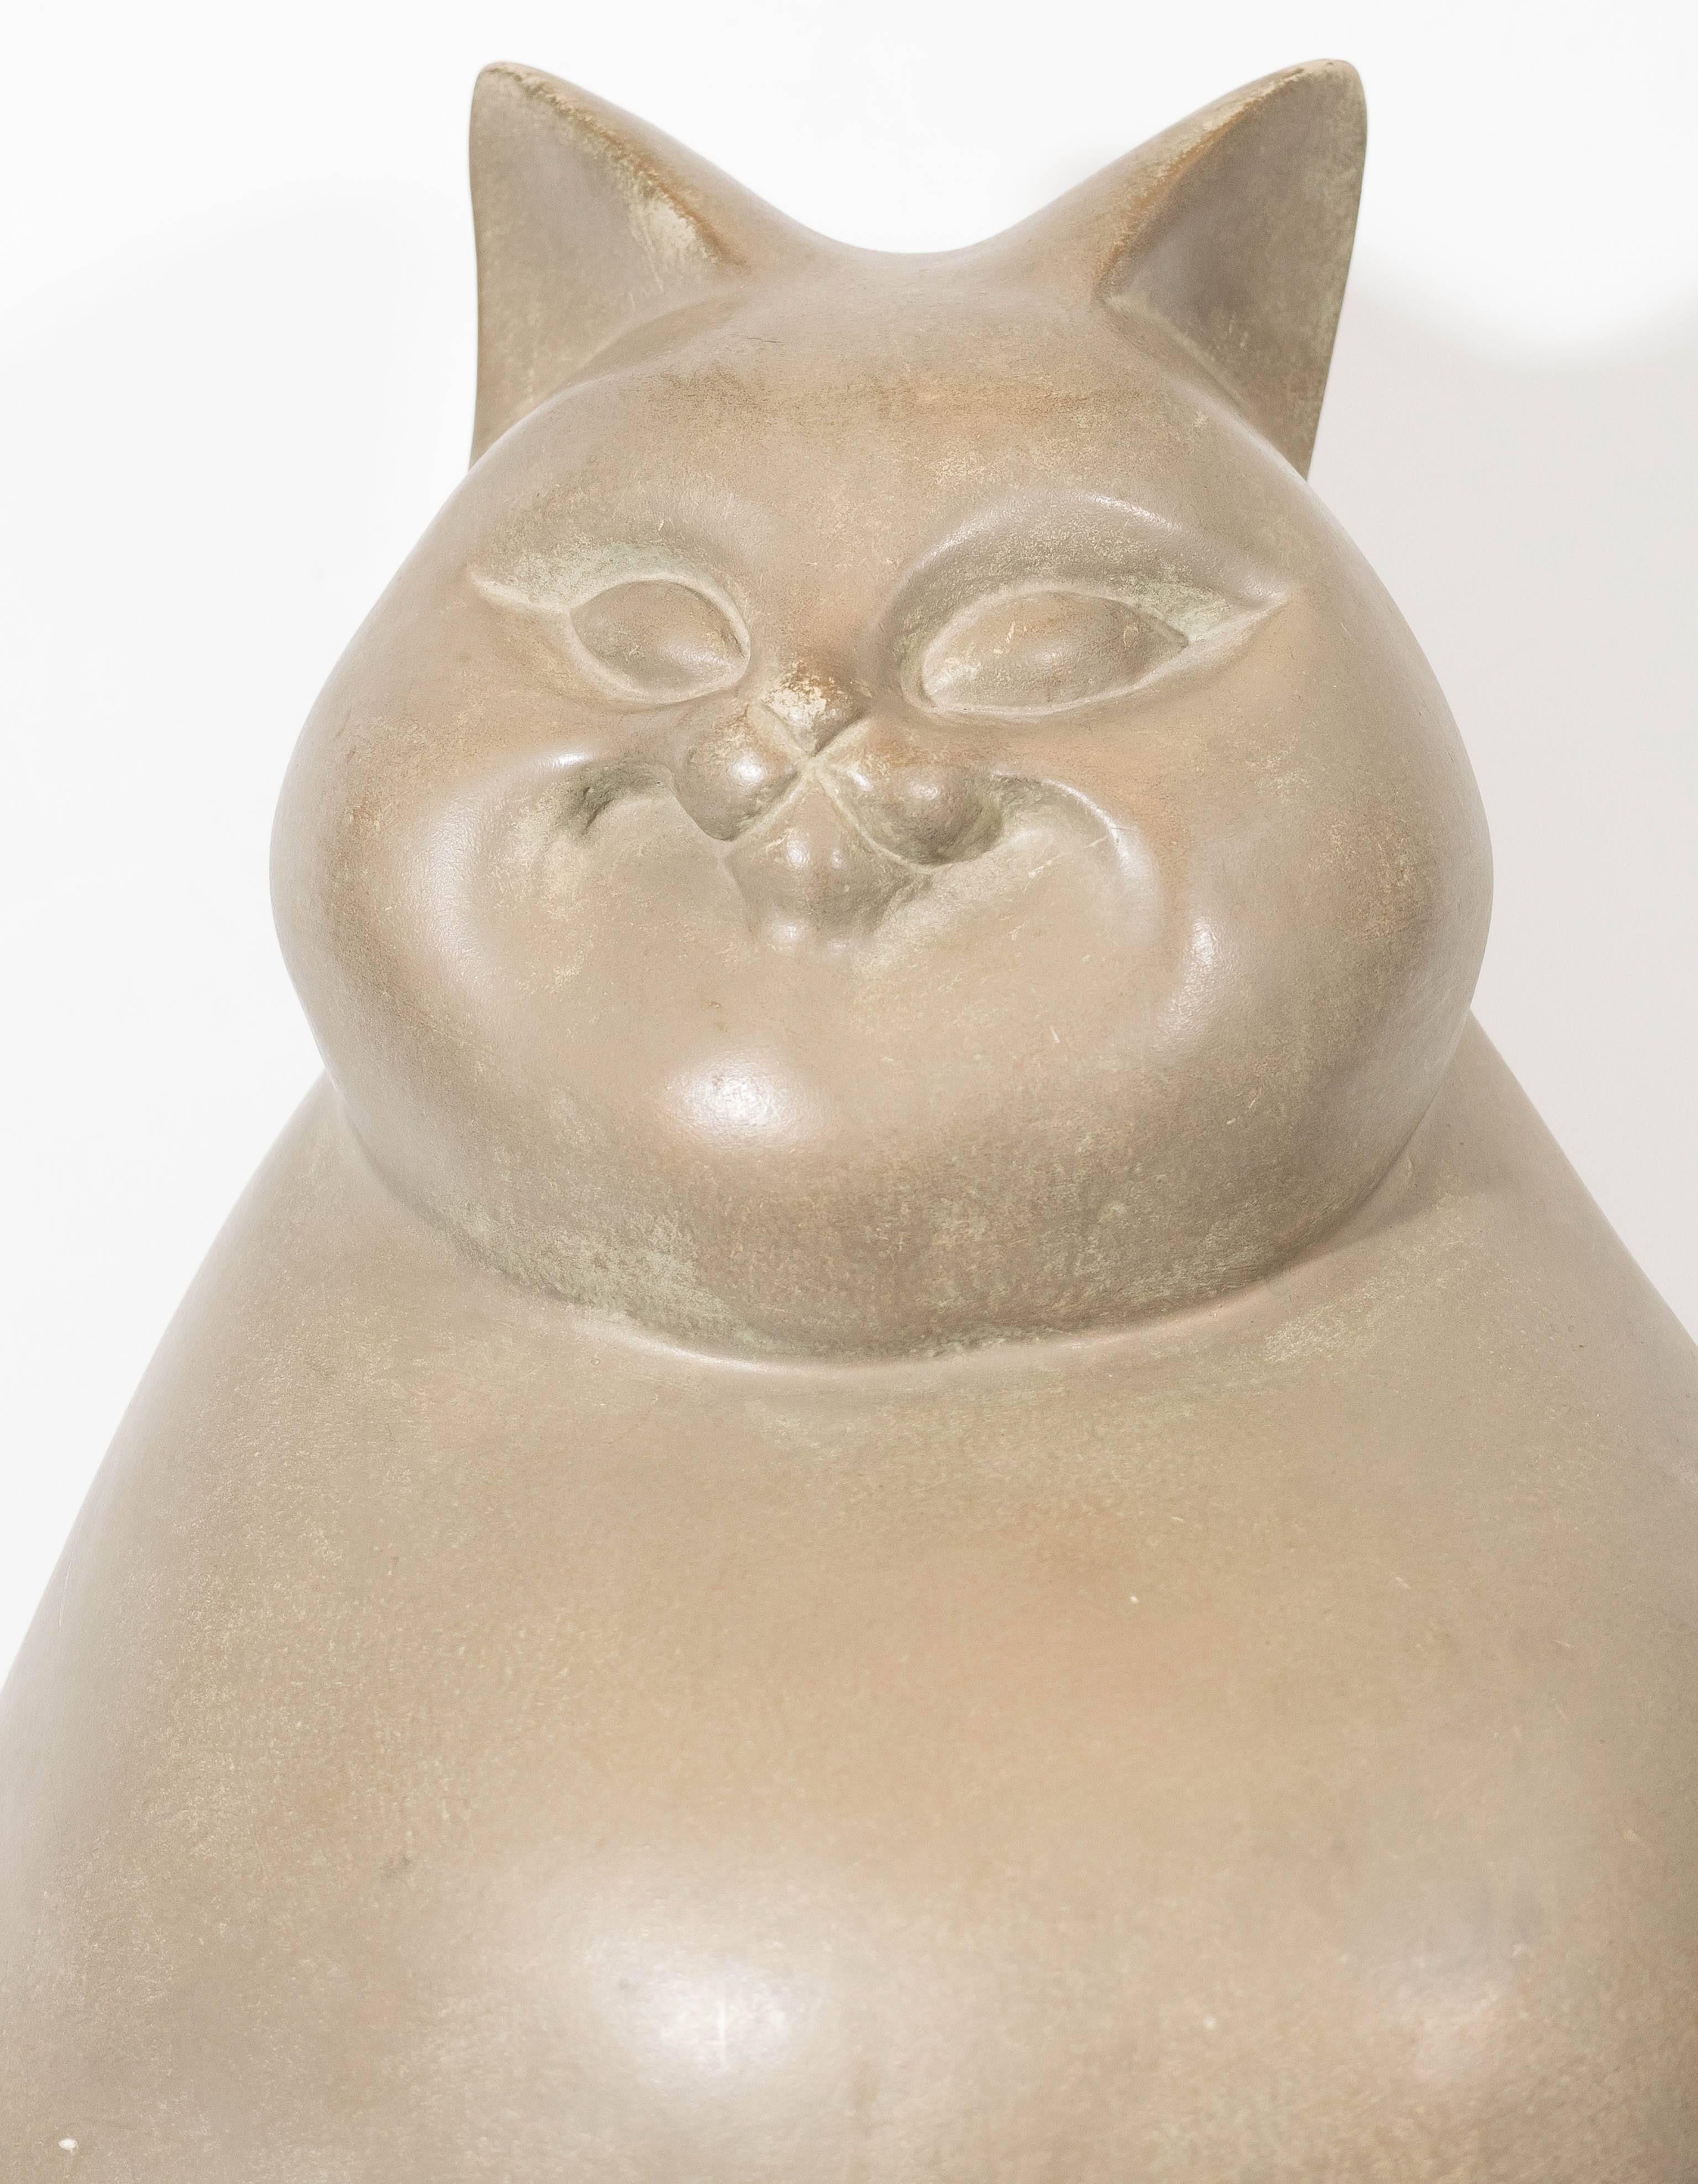 This modern ceramic sculpture of a grinning fat cat derives much inspiration from artist Fernando Botero (b. 1932), best known for portraying heavy-set figures and animals in his works of art. The sculpture's clean lines and minimal details marries